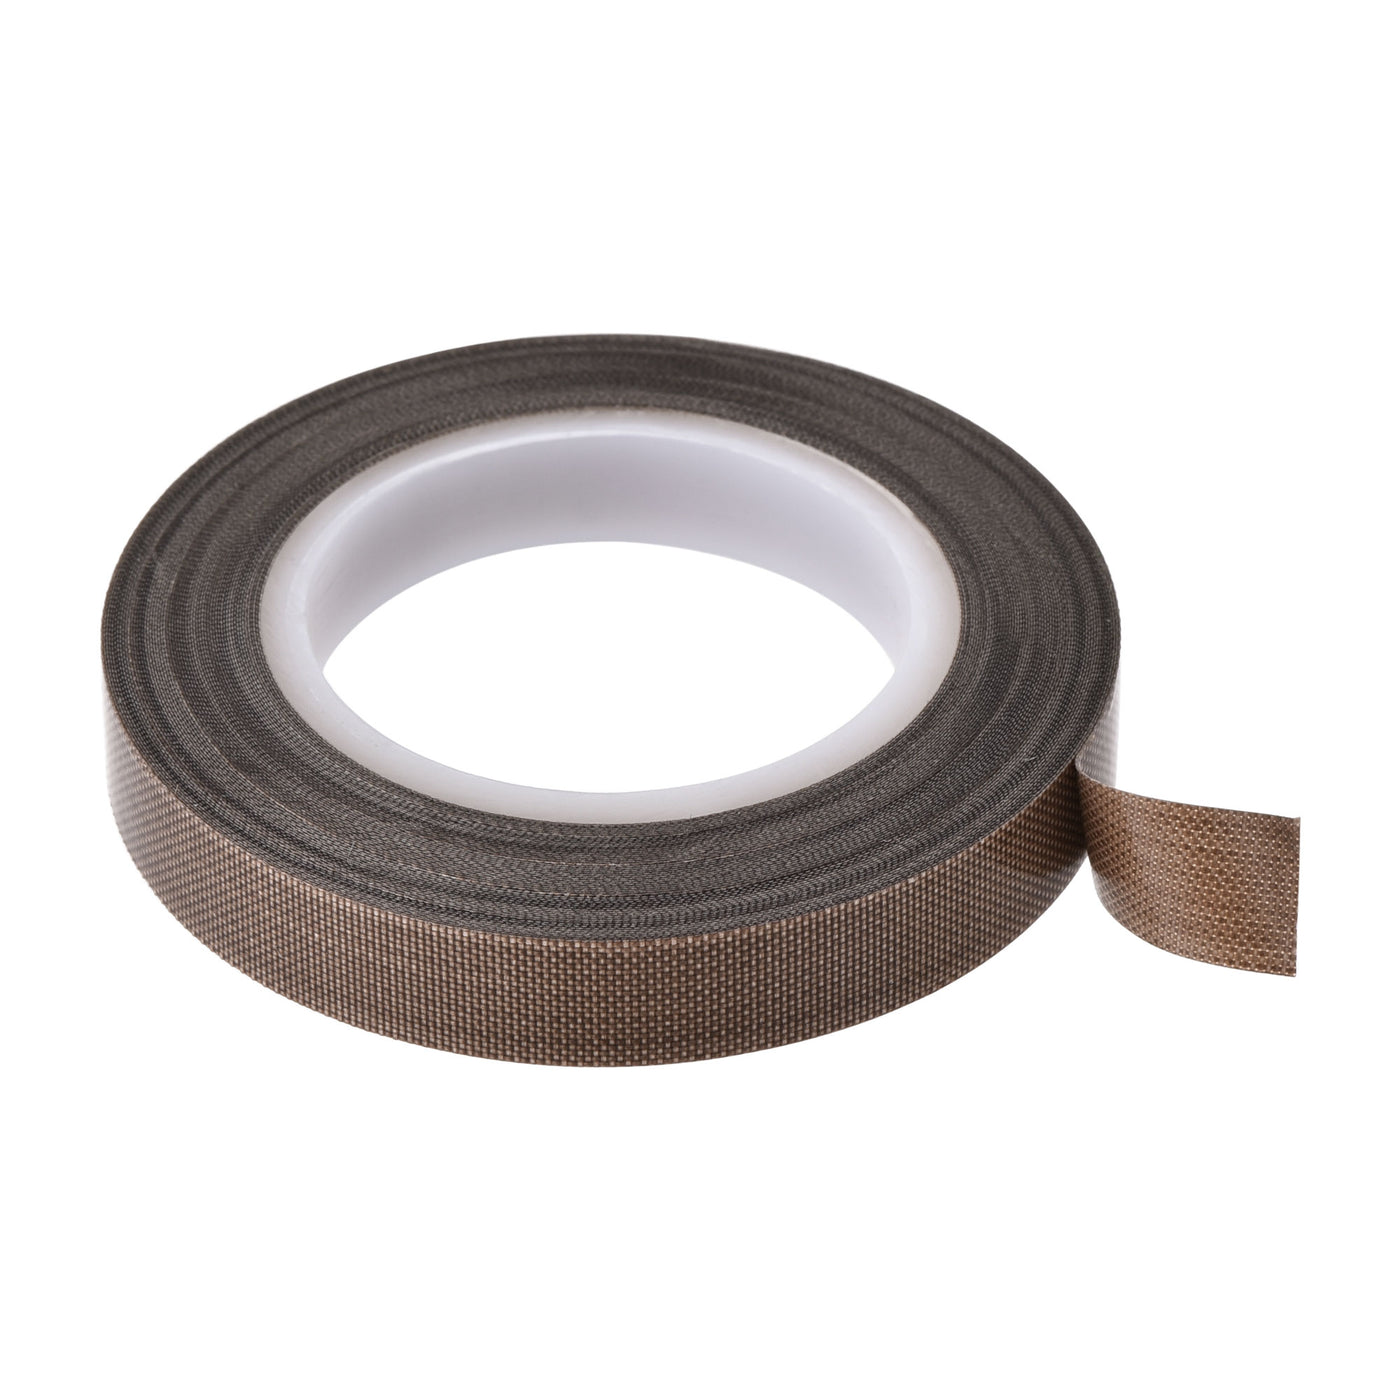 Uxcell Uxcell Heat Resistant Tape High Temperature Tape PTFE Film Adhesive Tape 19mm Width 10m 33ft Length Brown